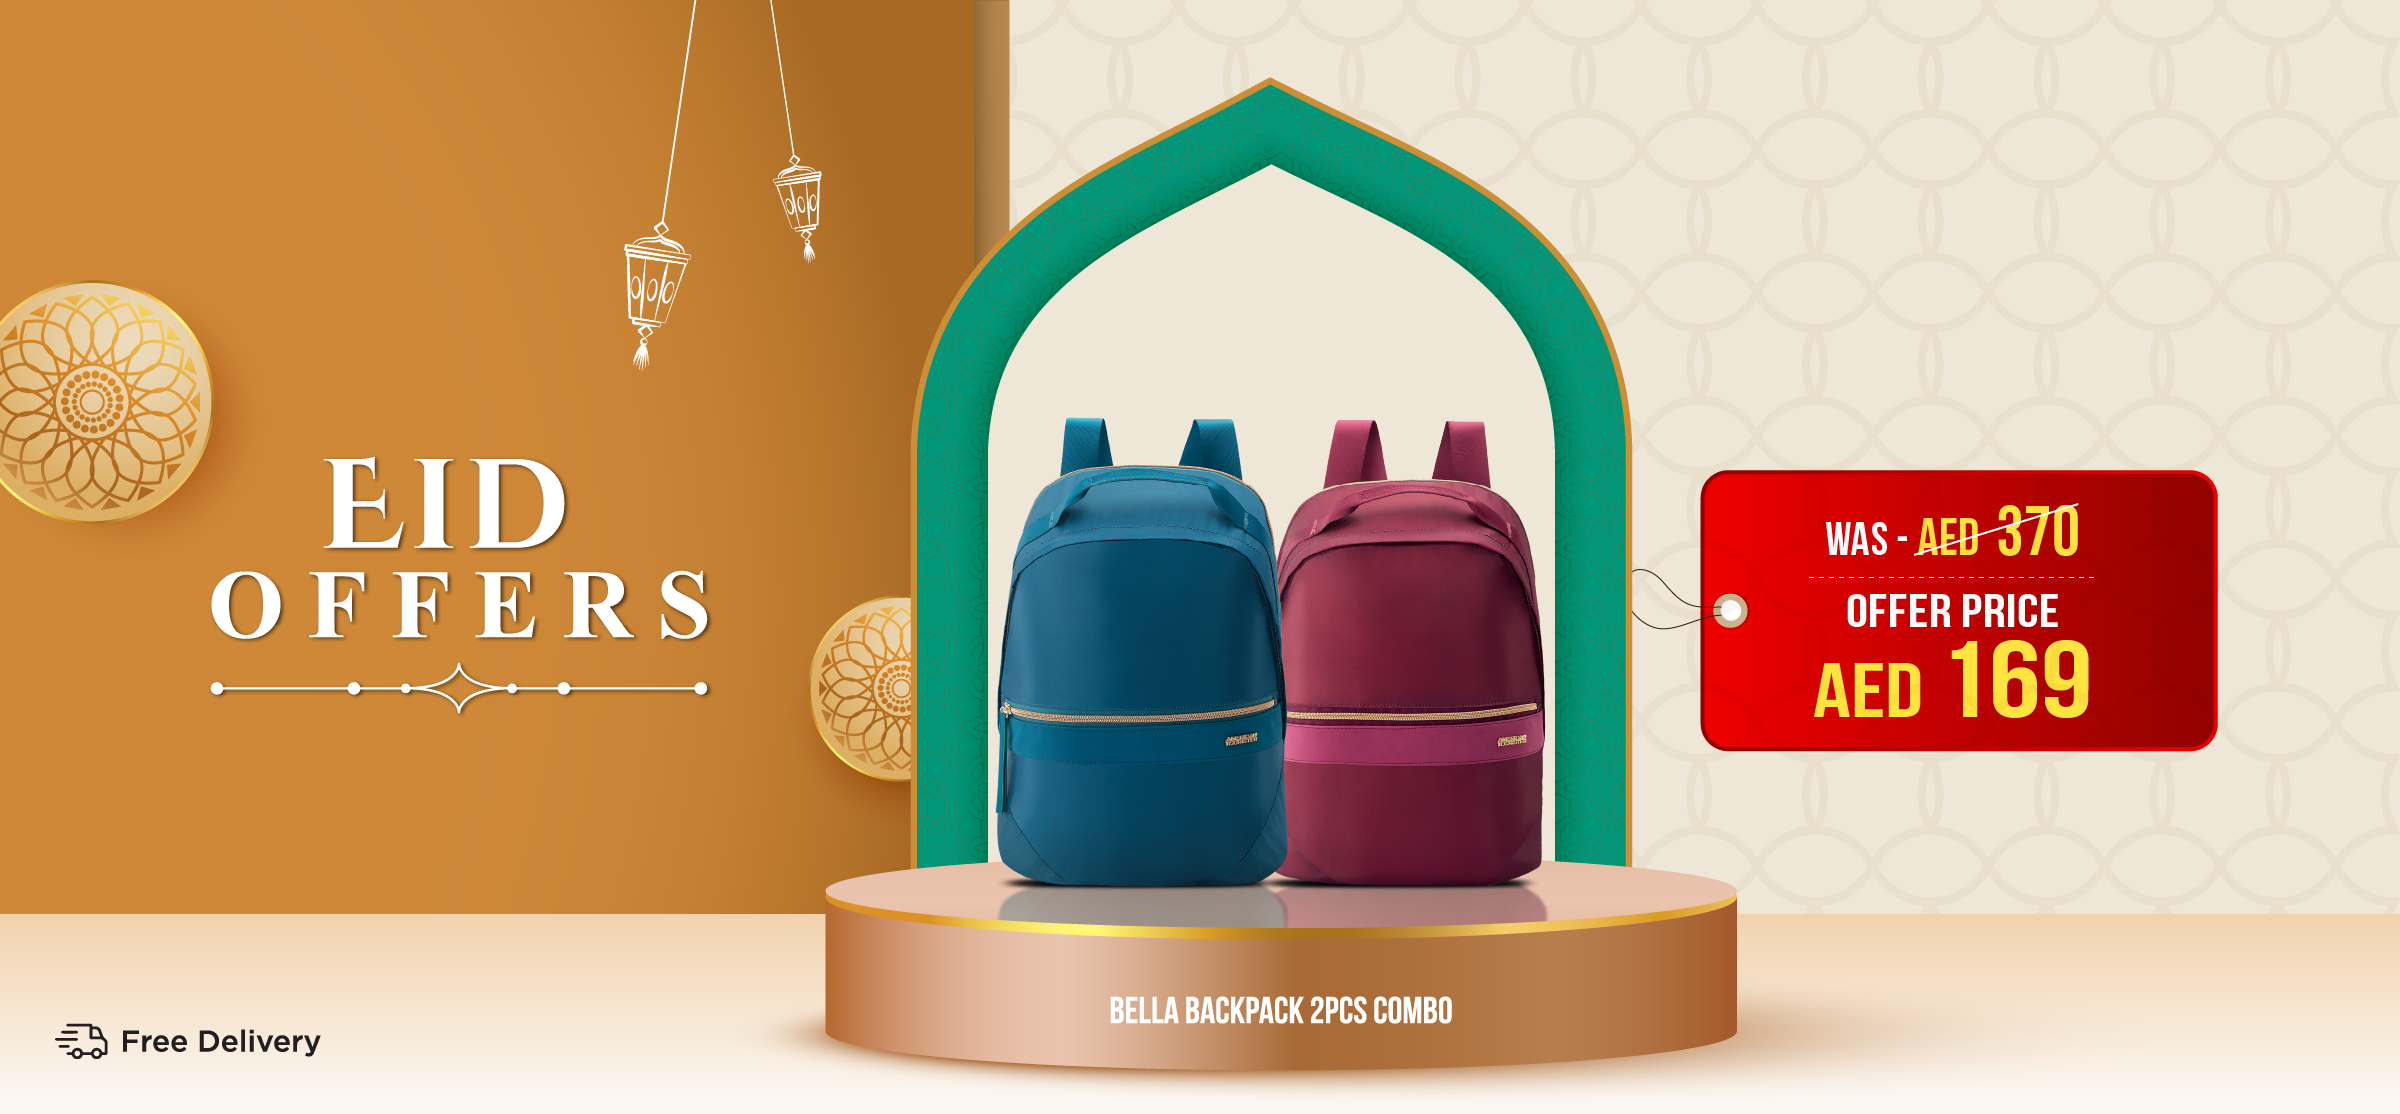 American Tourister EID offers